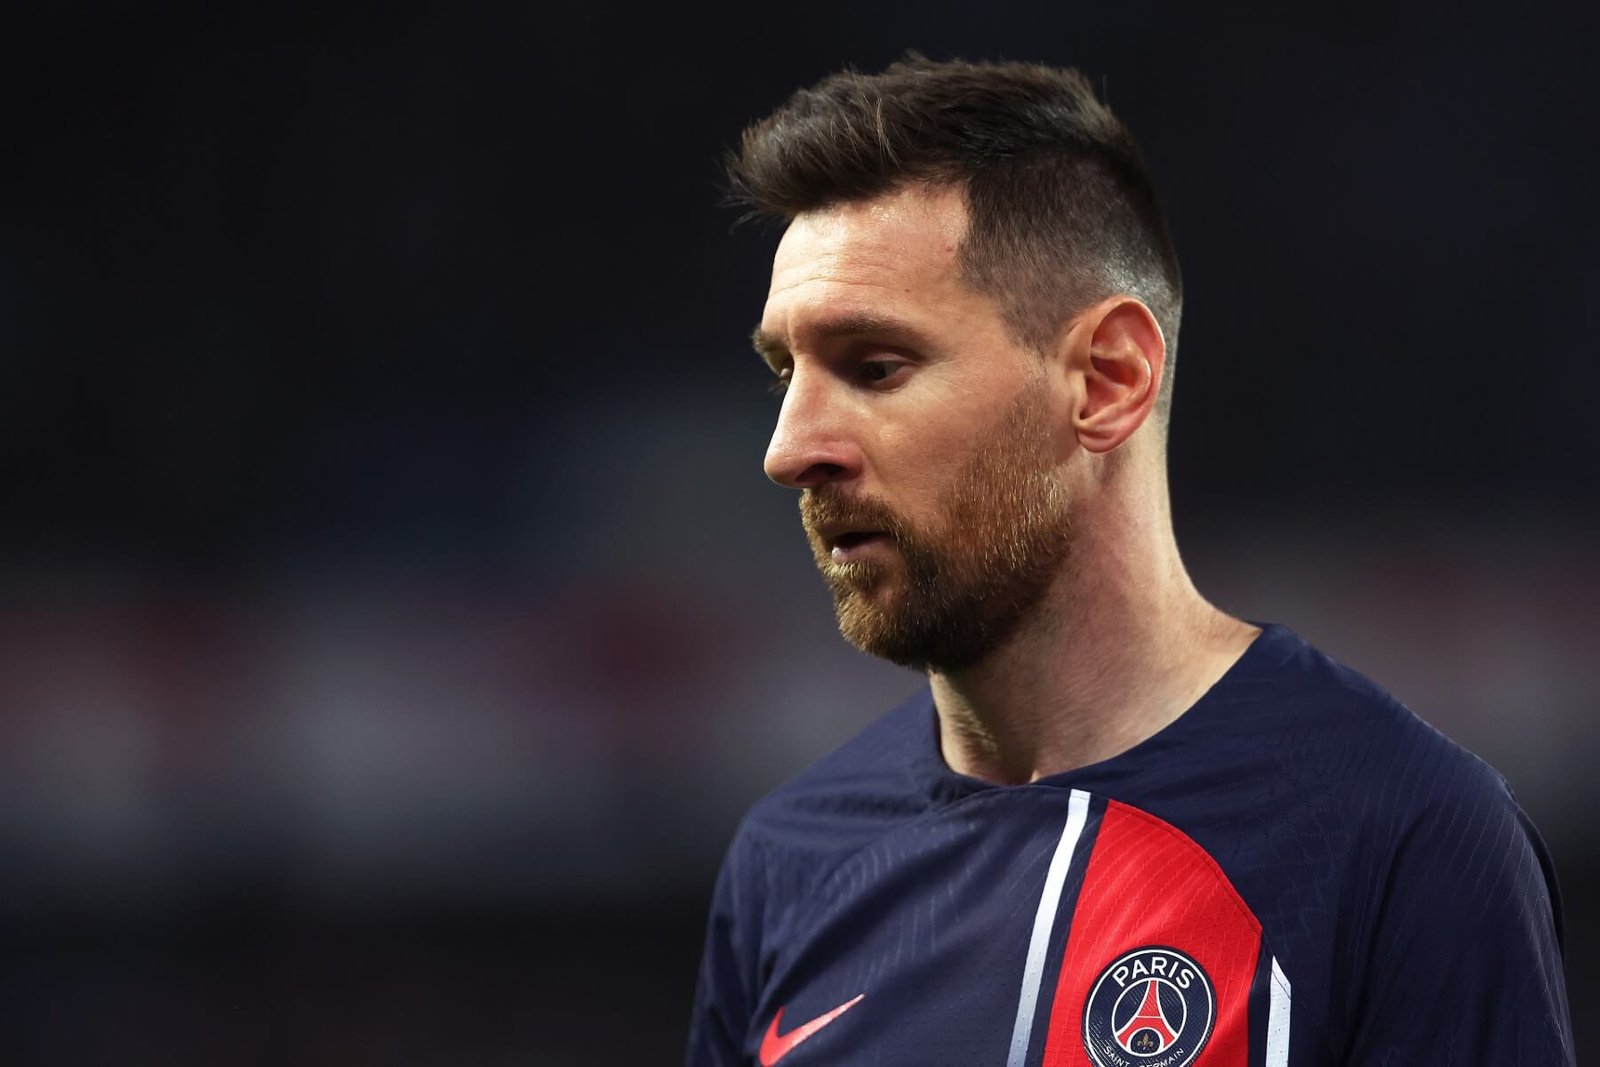 Messi’s PSG stay was not as successful as anticipated (Photo: Getty Images)